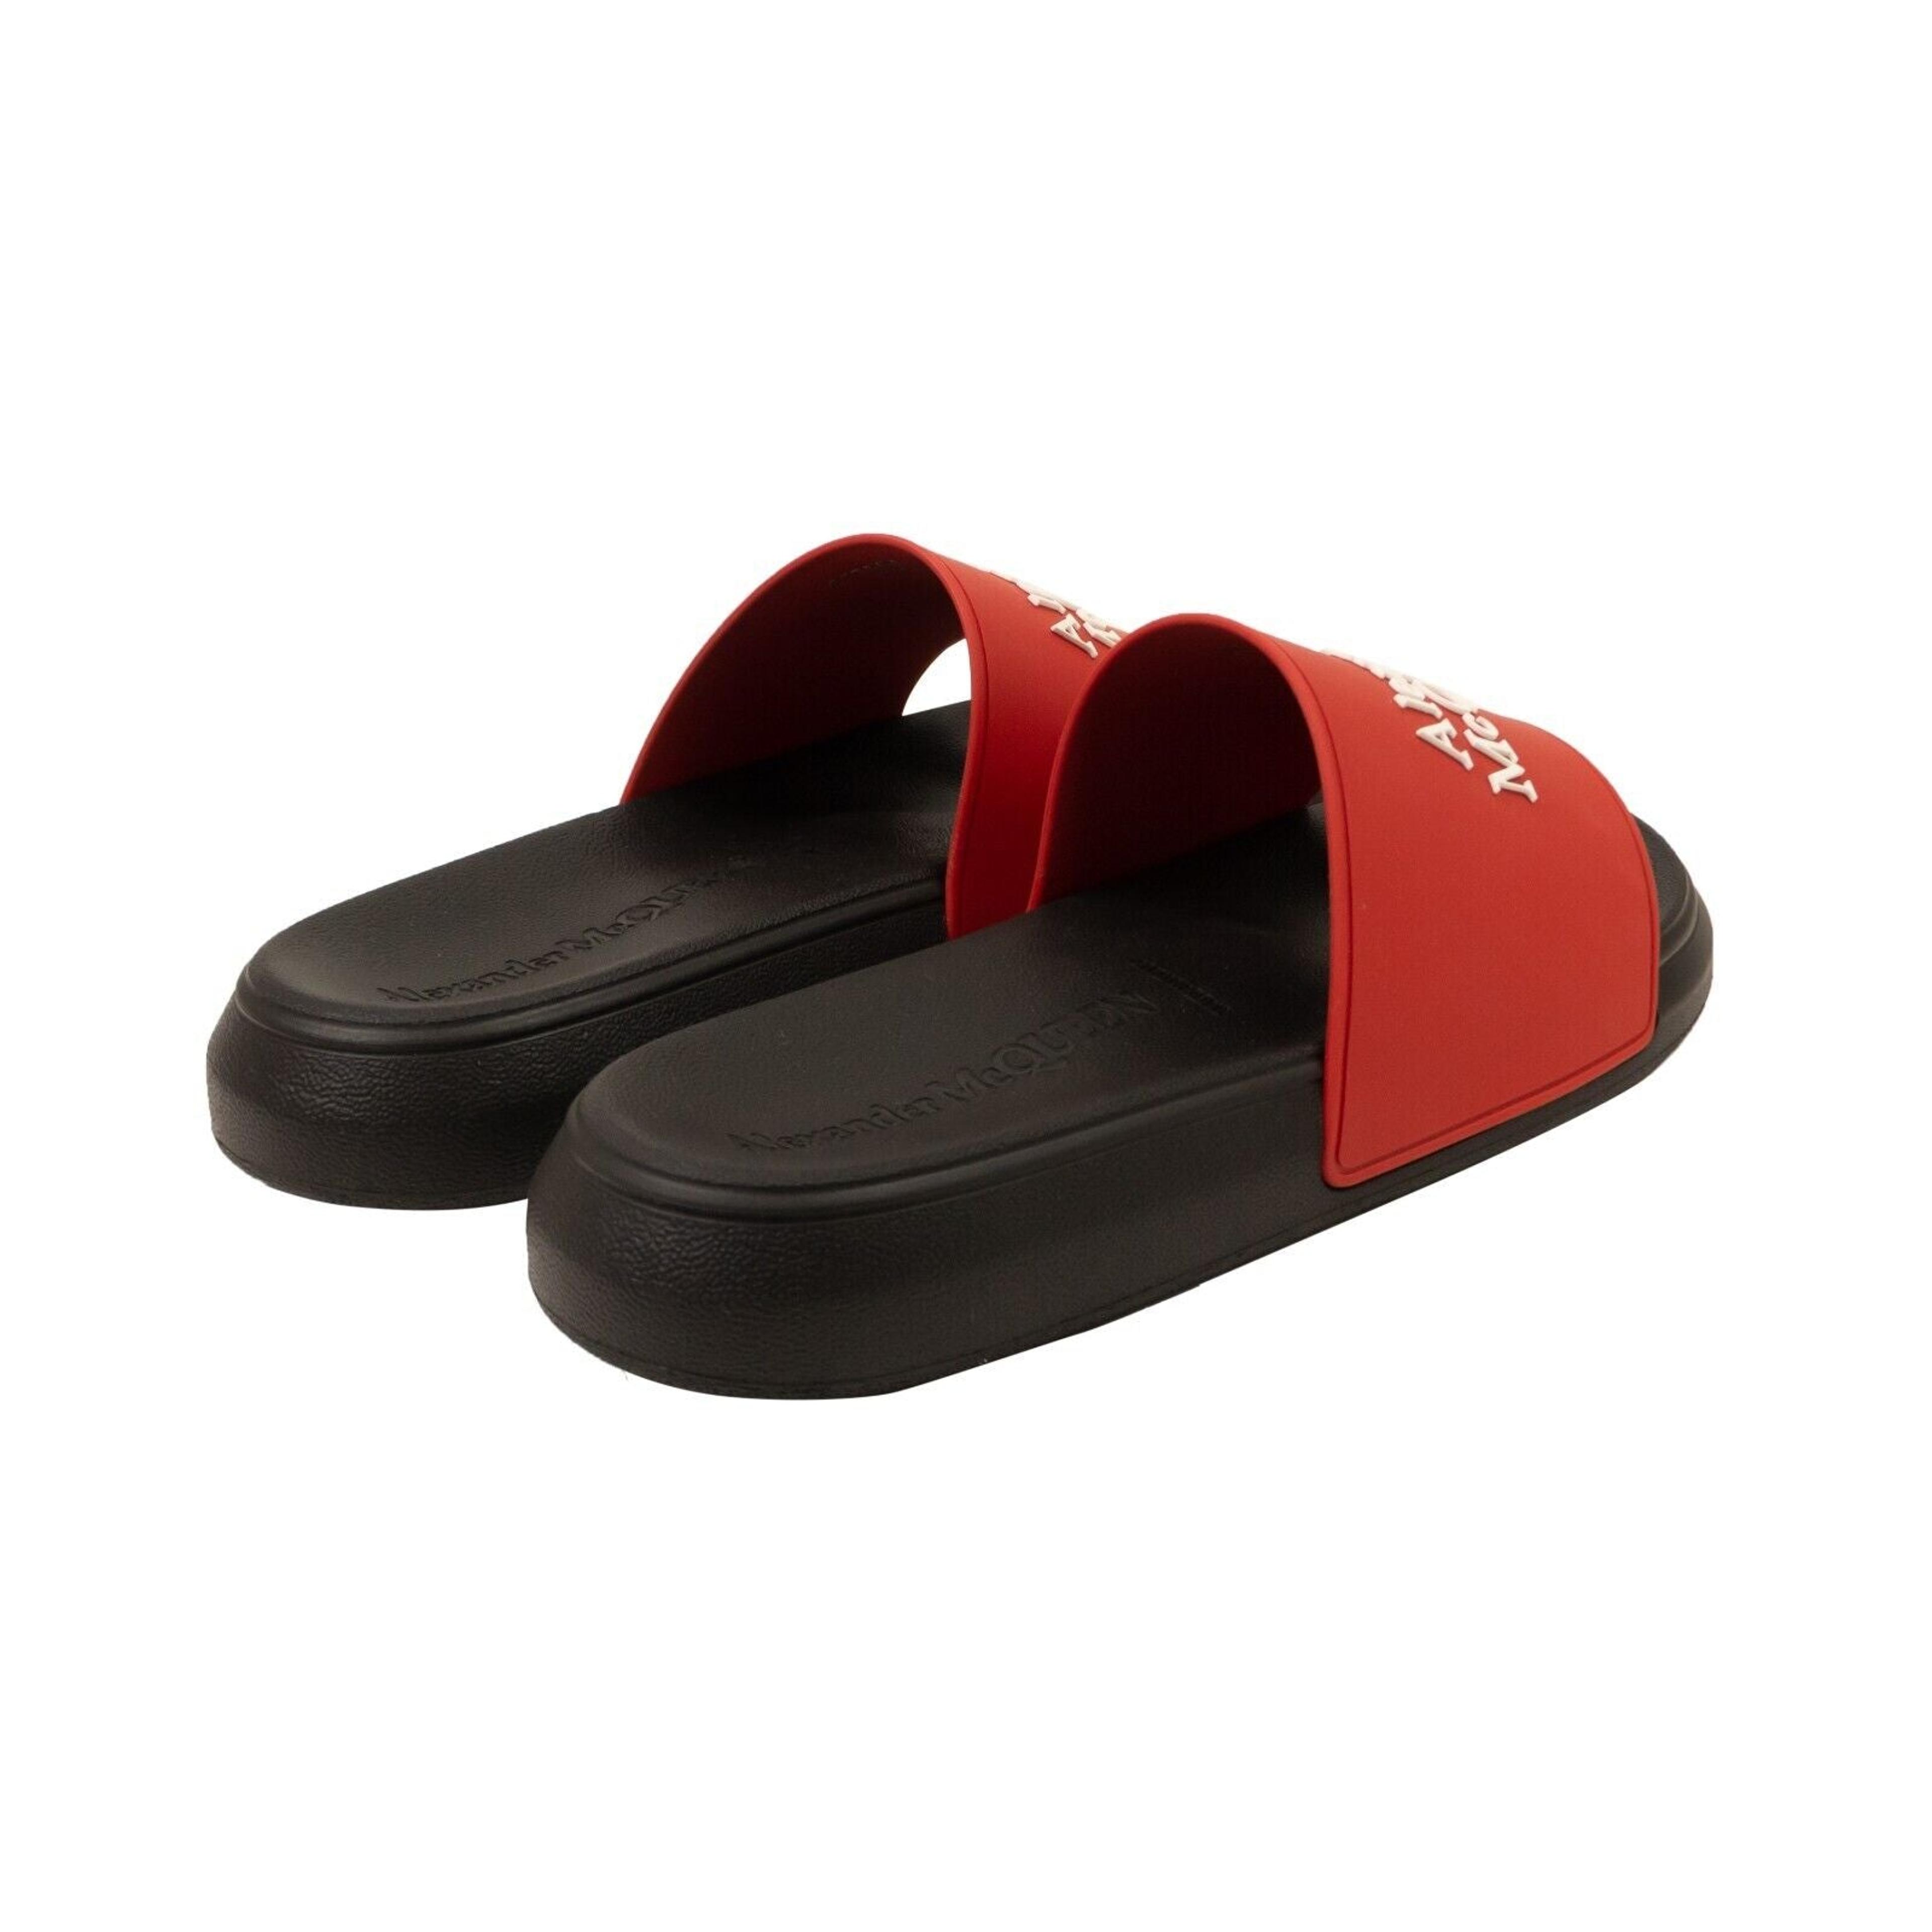 Alternate View 3 of Black And Red Logo Pool Slides